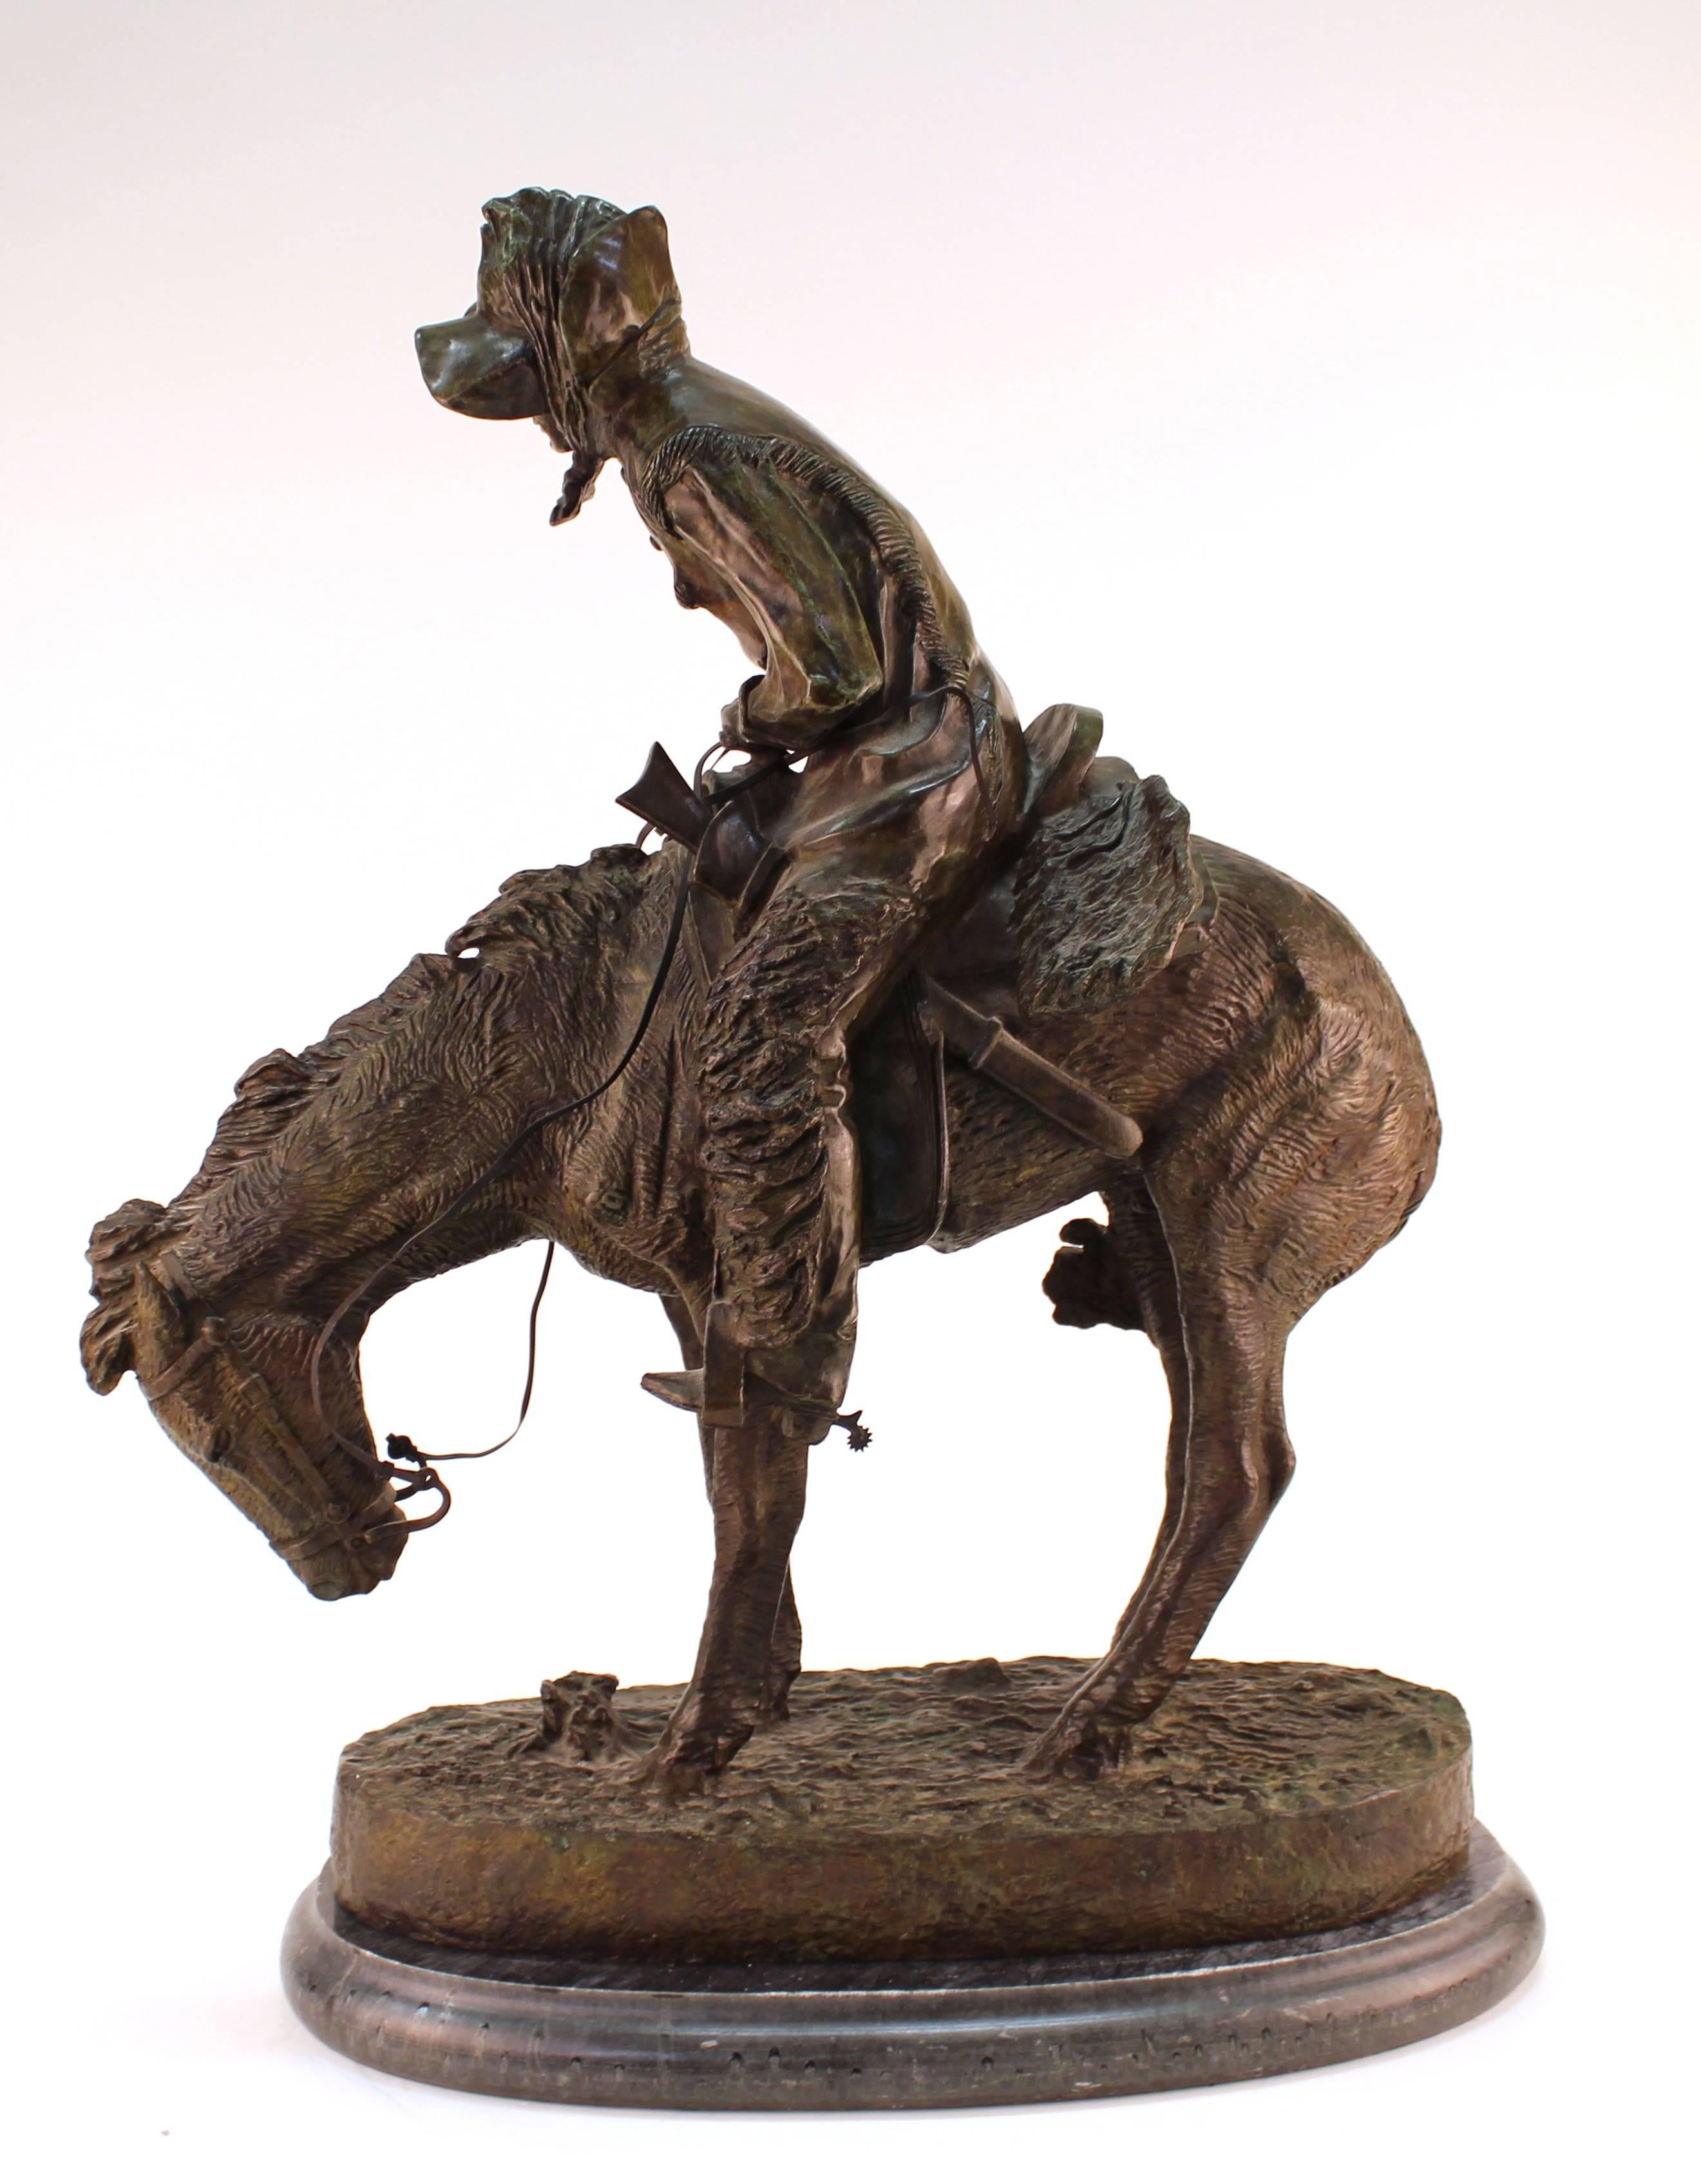 A detailed bronze sculpture by Frederic Remington, titled 